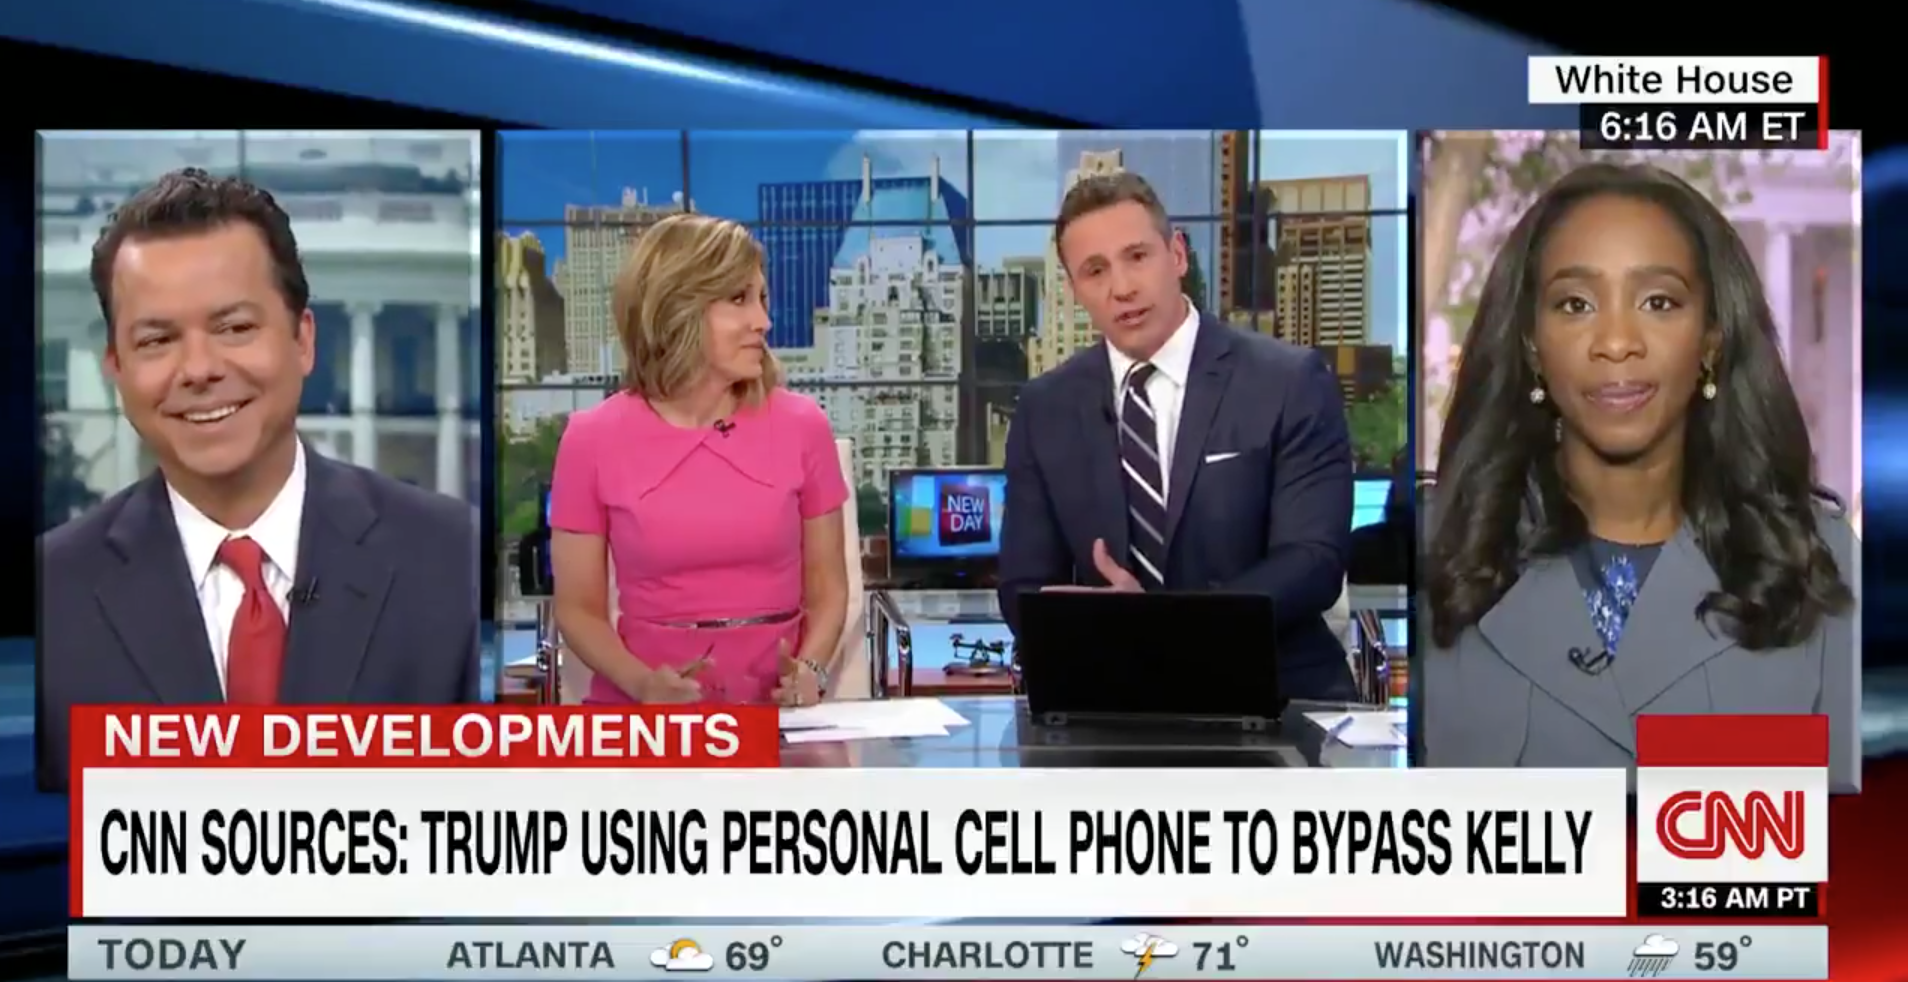 Chris Cuomo chiding Trump about cell phone use.